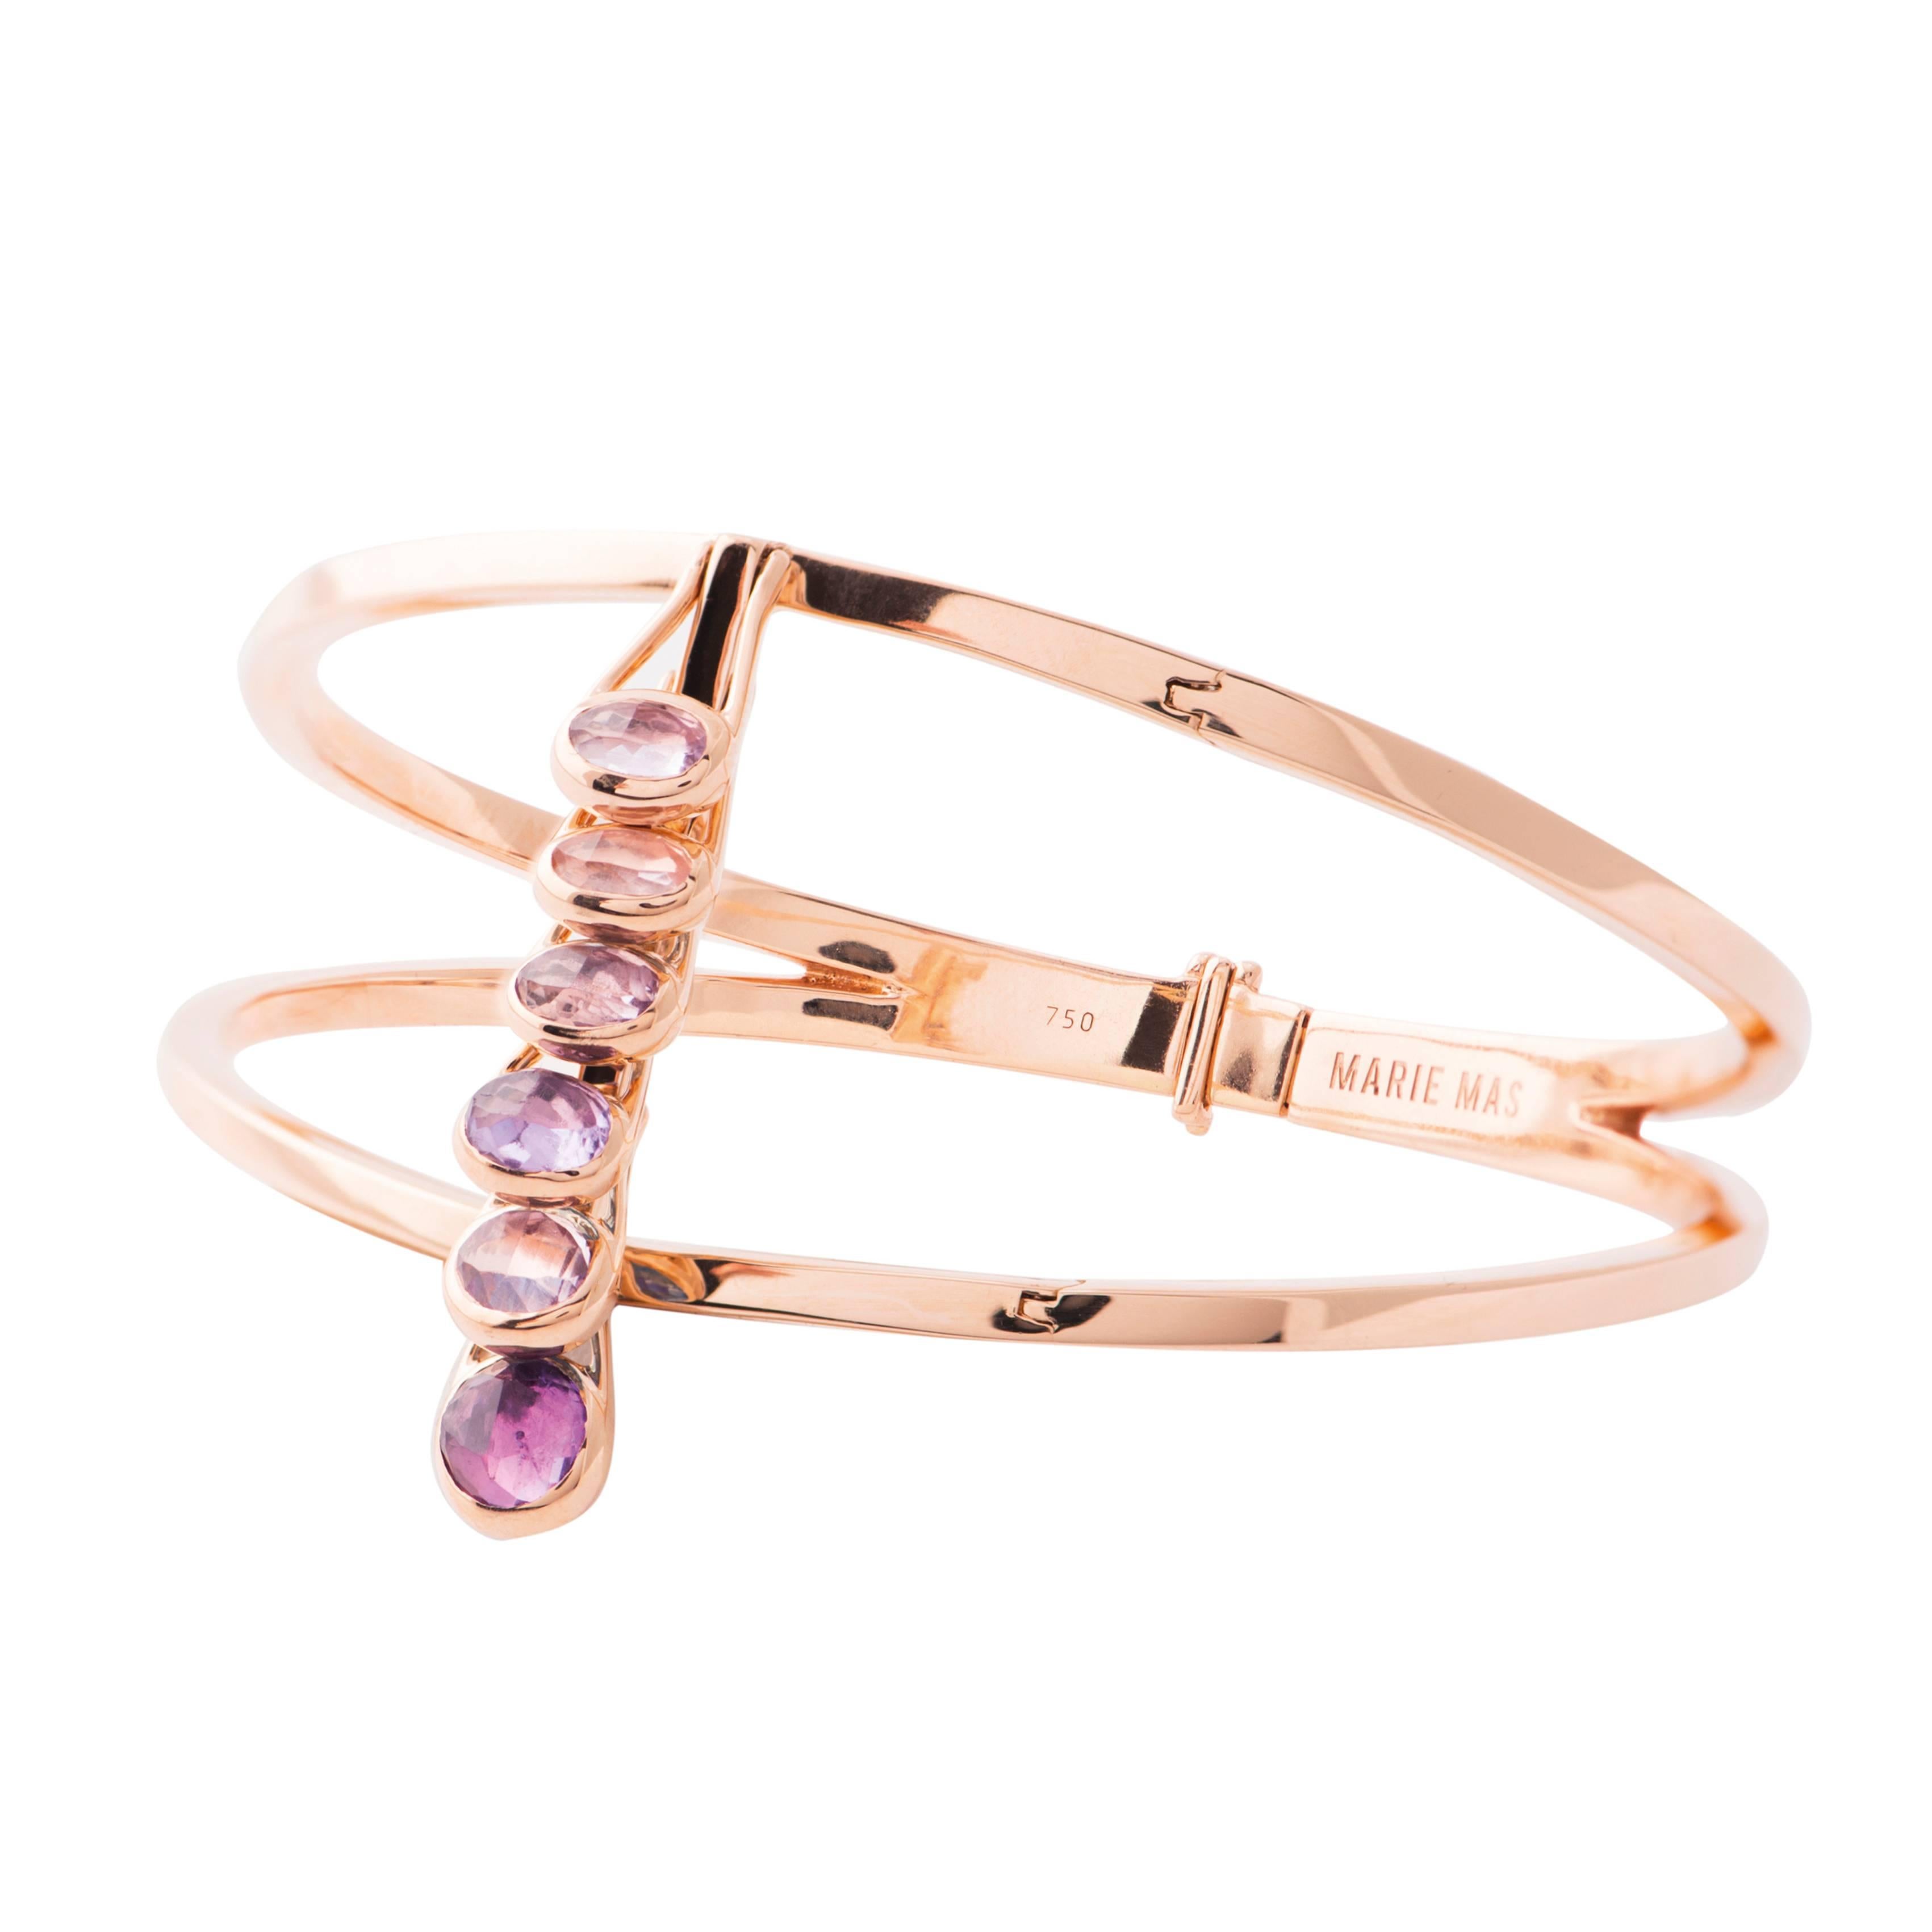 This Reversible Bracelet from the French Jewelry brand Marie Mas is made in 18 Karat Rose Gold. When you move you arm, the bracelet is moving with you and changing color. All the stones are articulated and can move like dominos, from one side to the